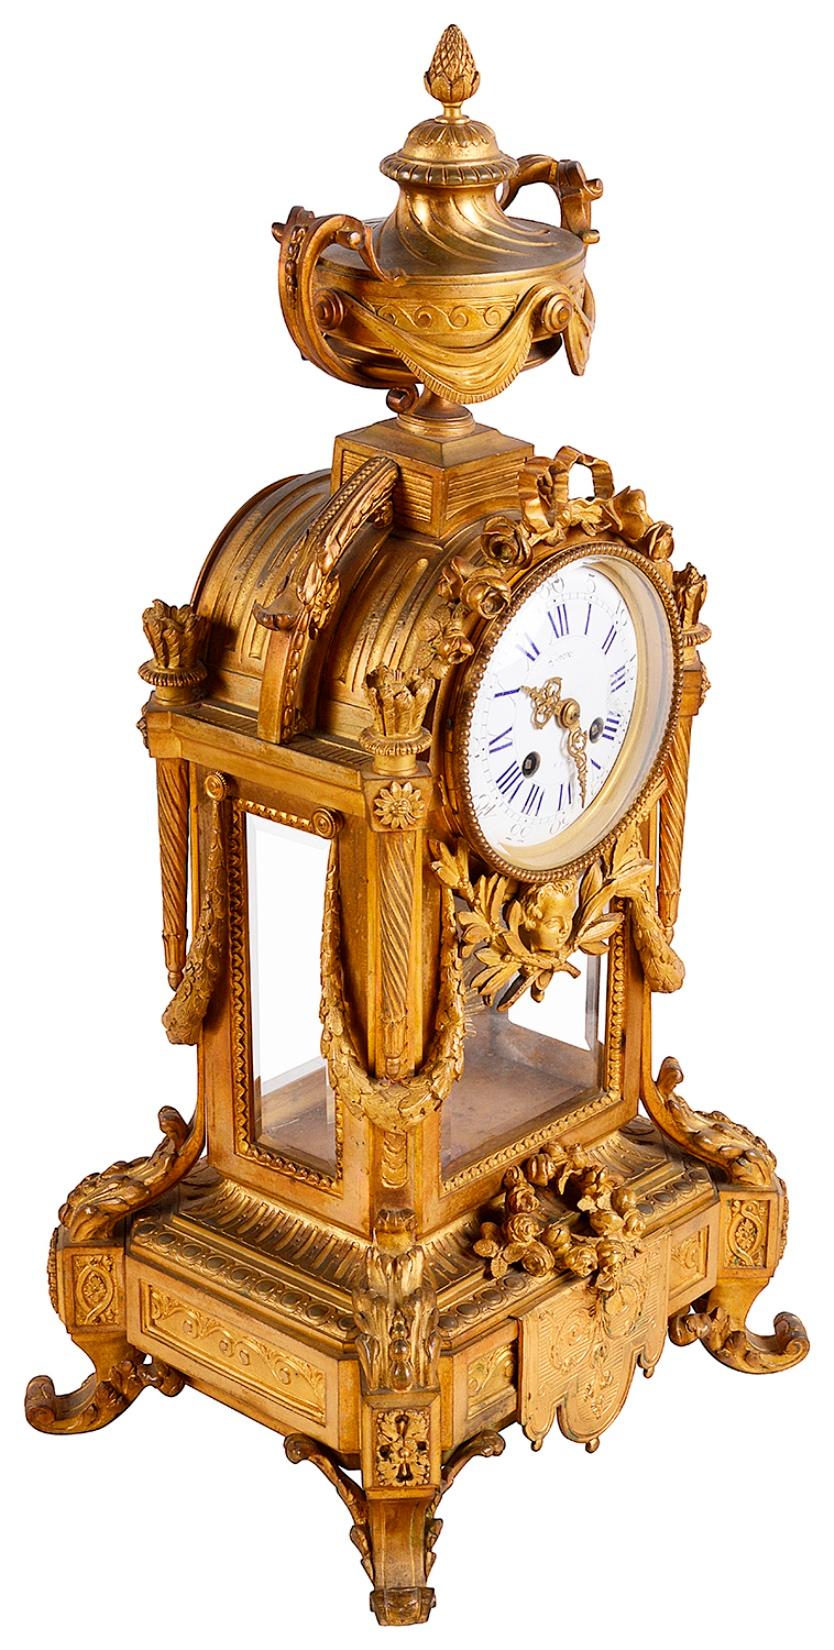 A very good quality late 19th century French gilded ormolu clock garniture, having a pair of five branch scrolling foliate candelabra either side. The white enameled clock face with and eight day duration movement that strikes on the hour and half